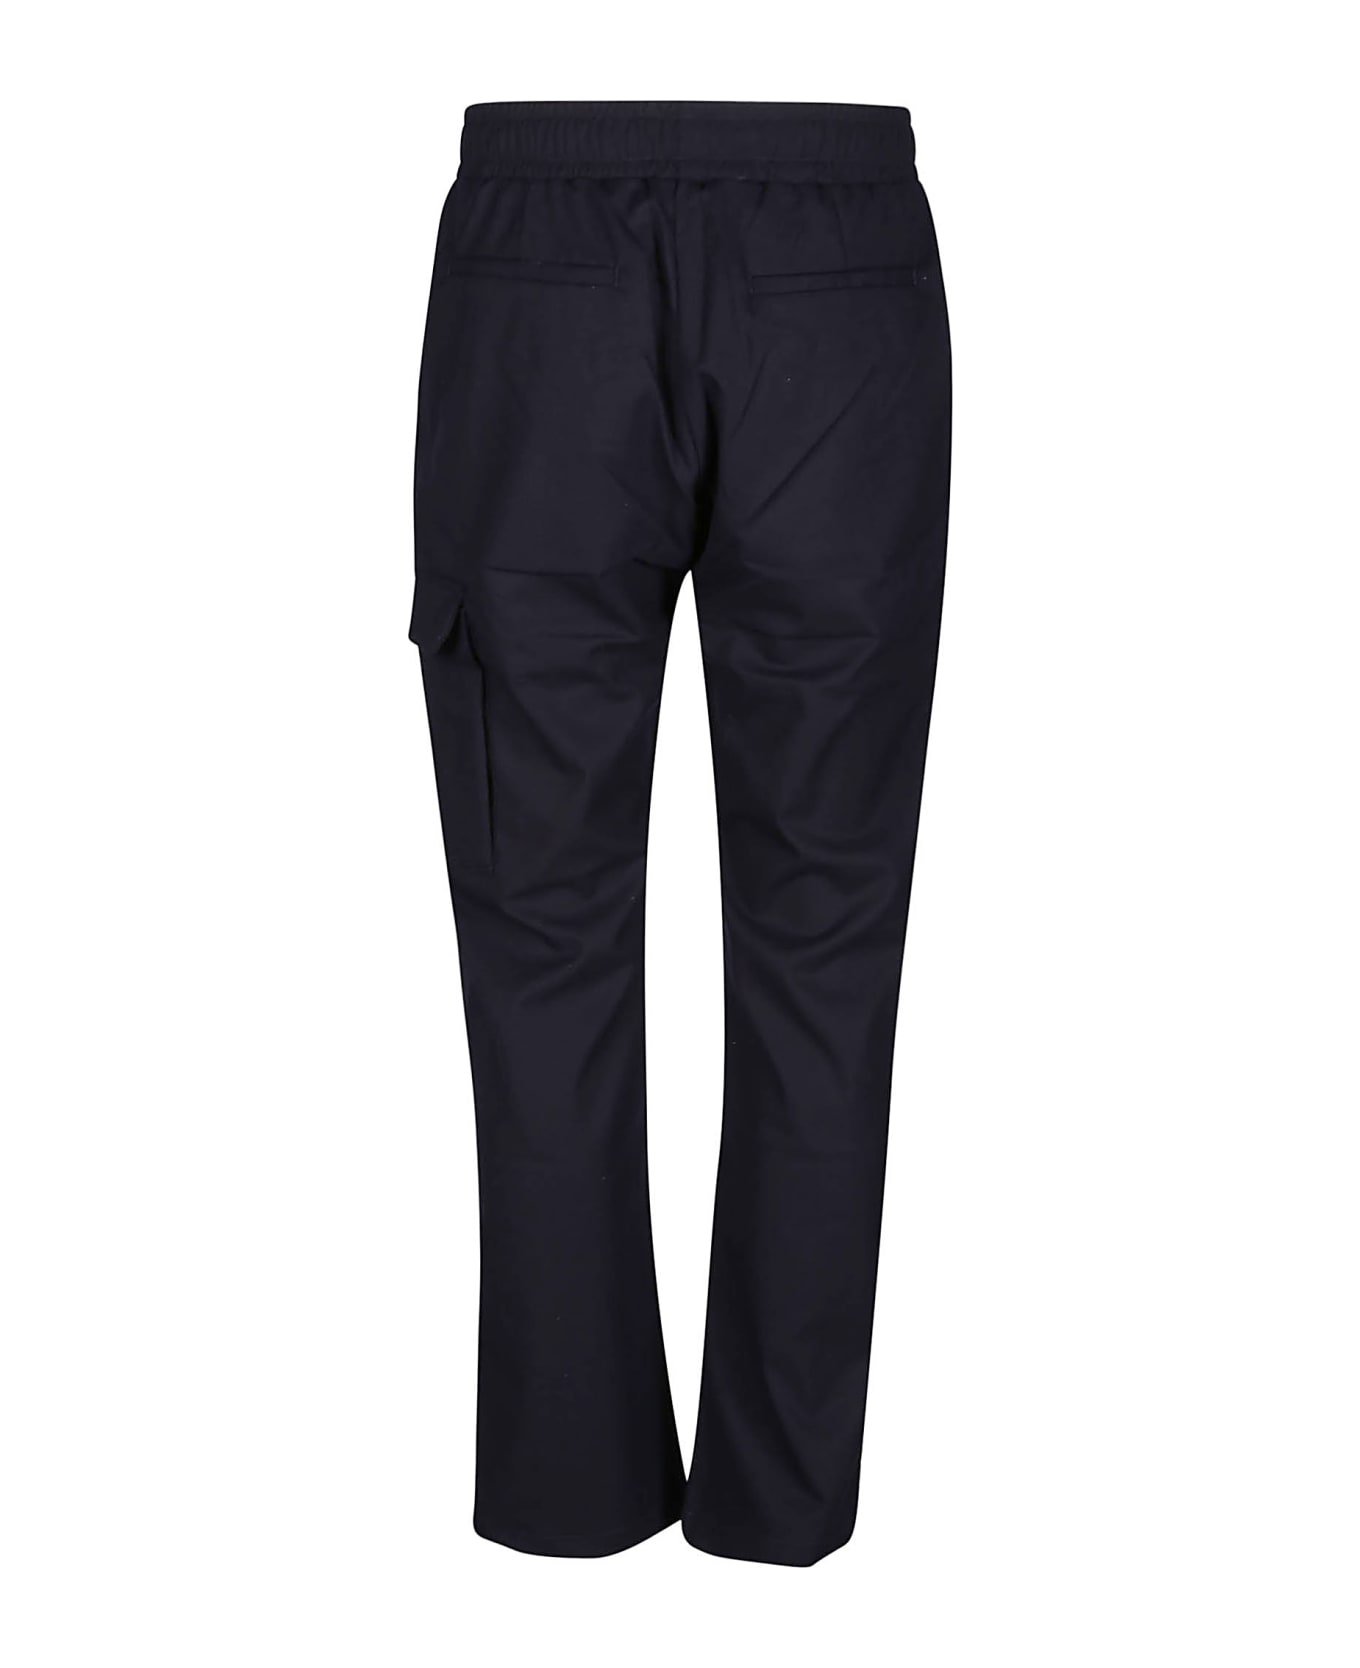 Family First Milano New Cargo Classic Pant - Dark Blue ボトムス